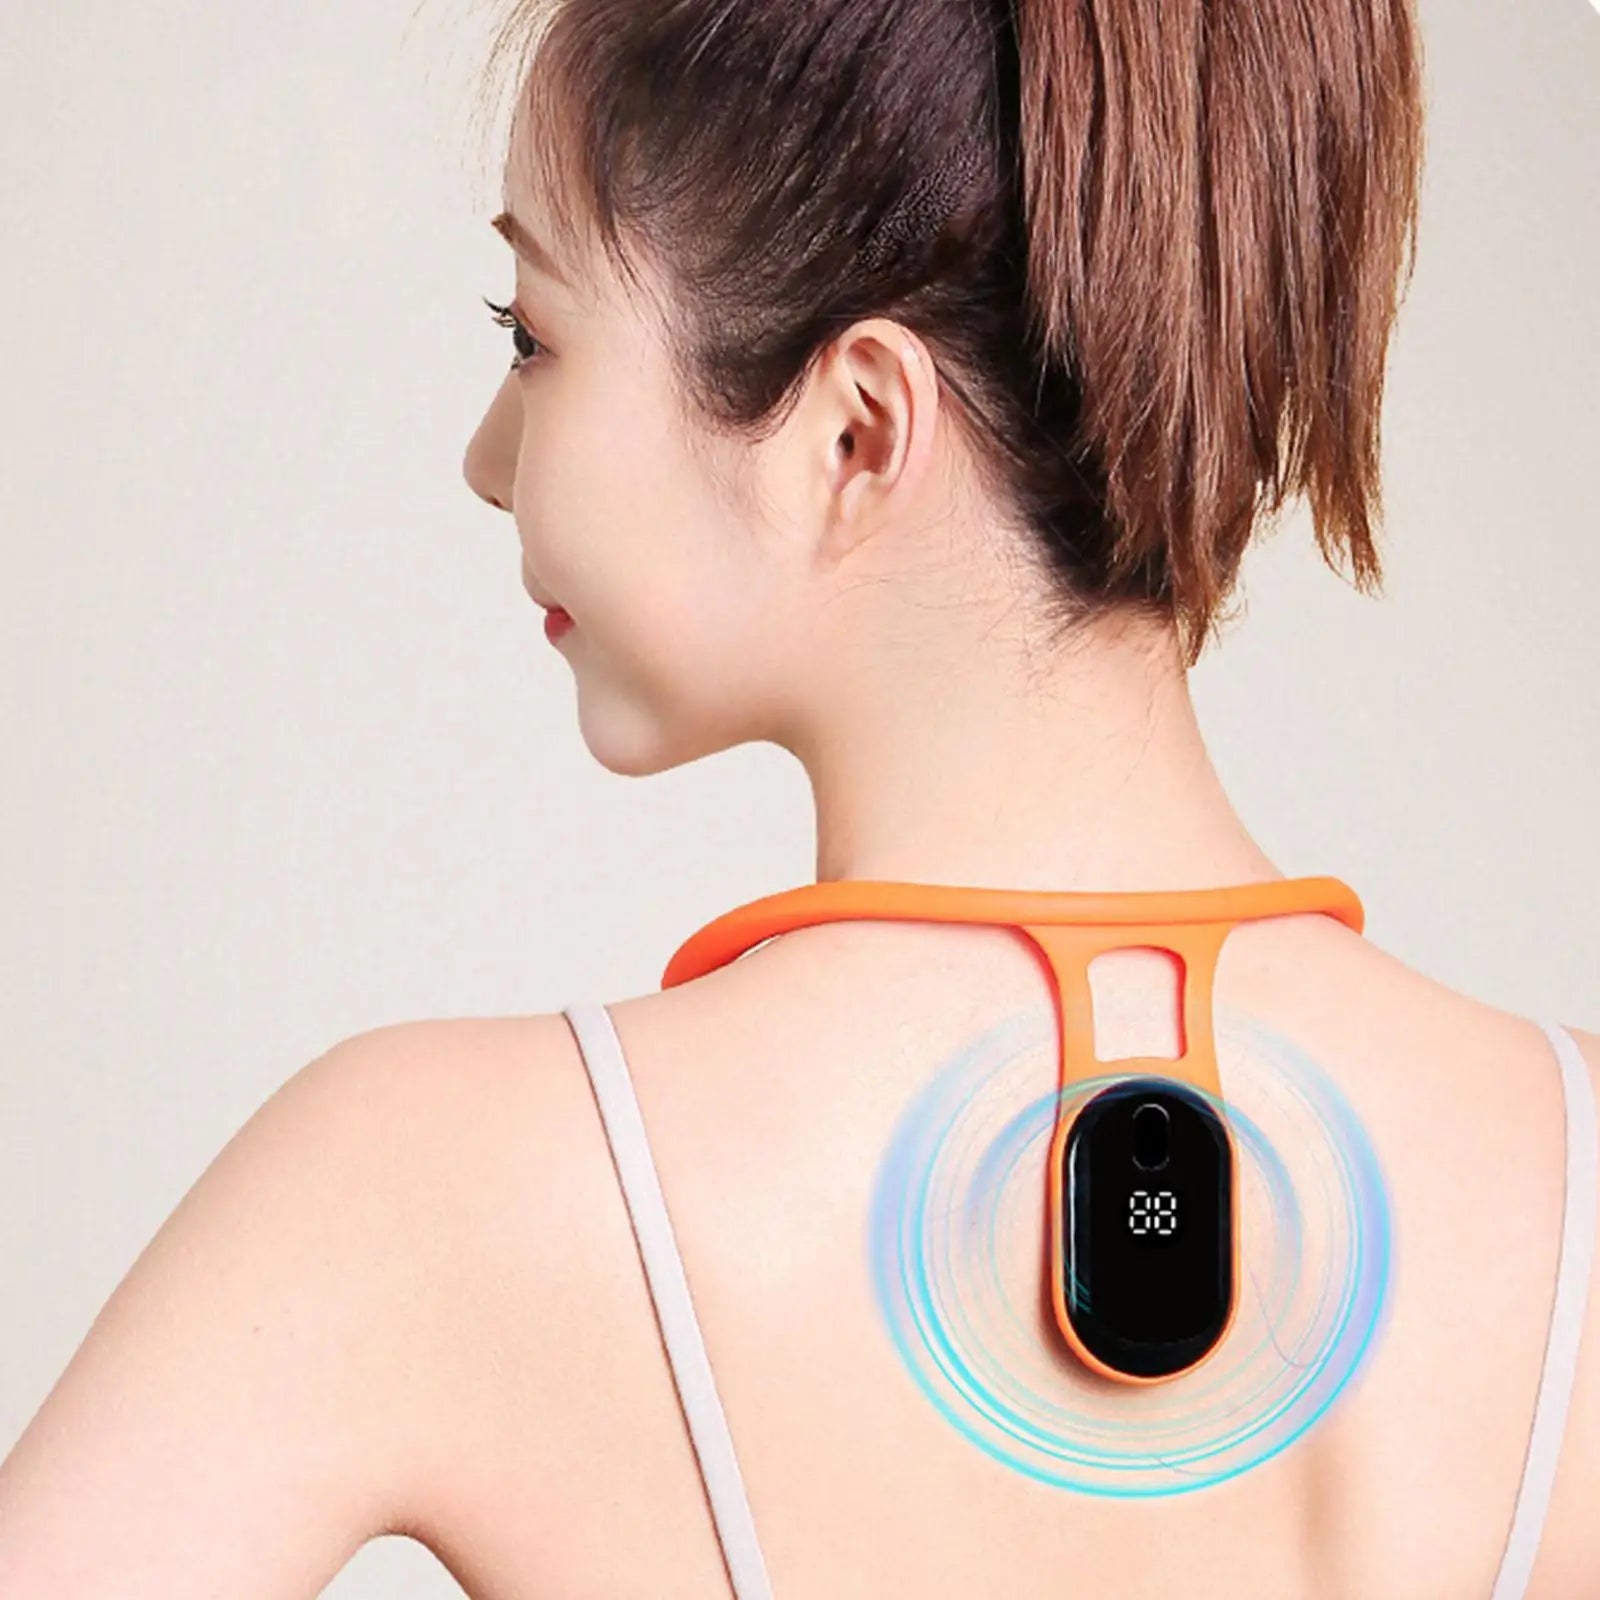 Back Support Ultrasonic Lymphatic Soothing Body Sitting Posture Corrector